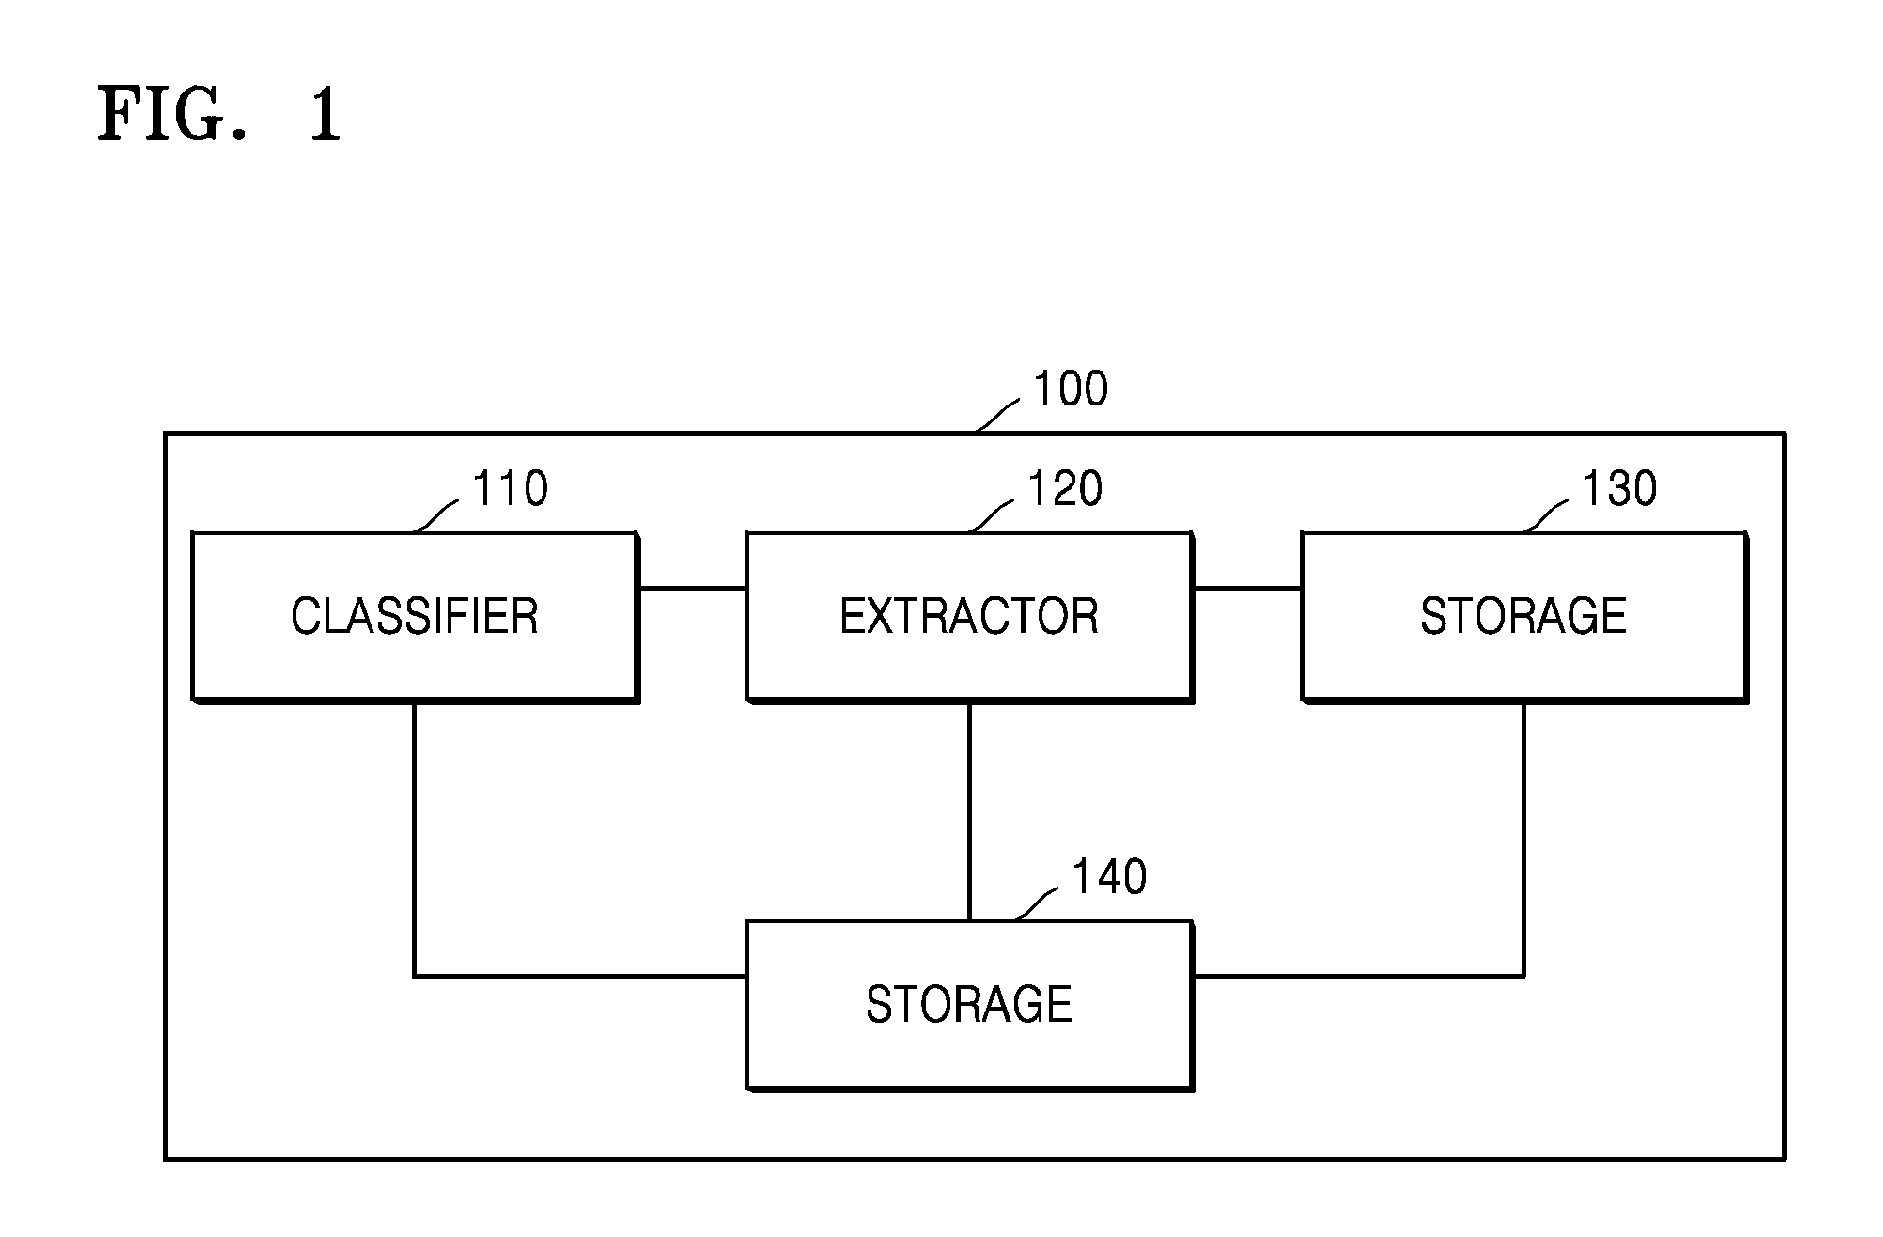 Video recording apparatus supporting smart search and smart search method performed using video recording apparatus